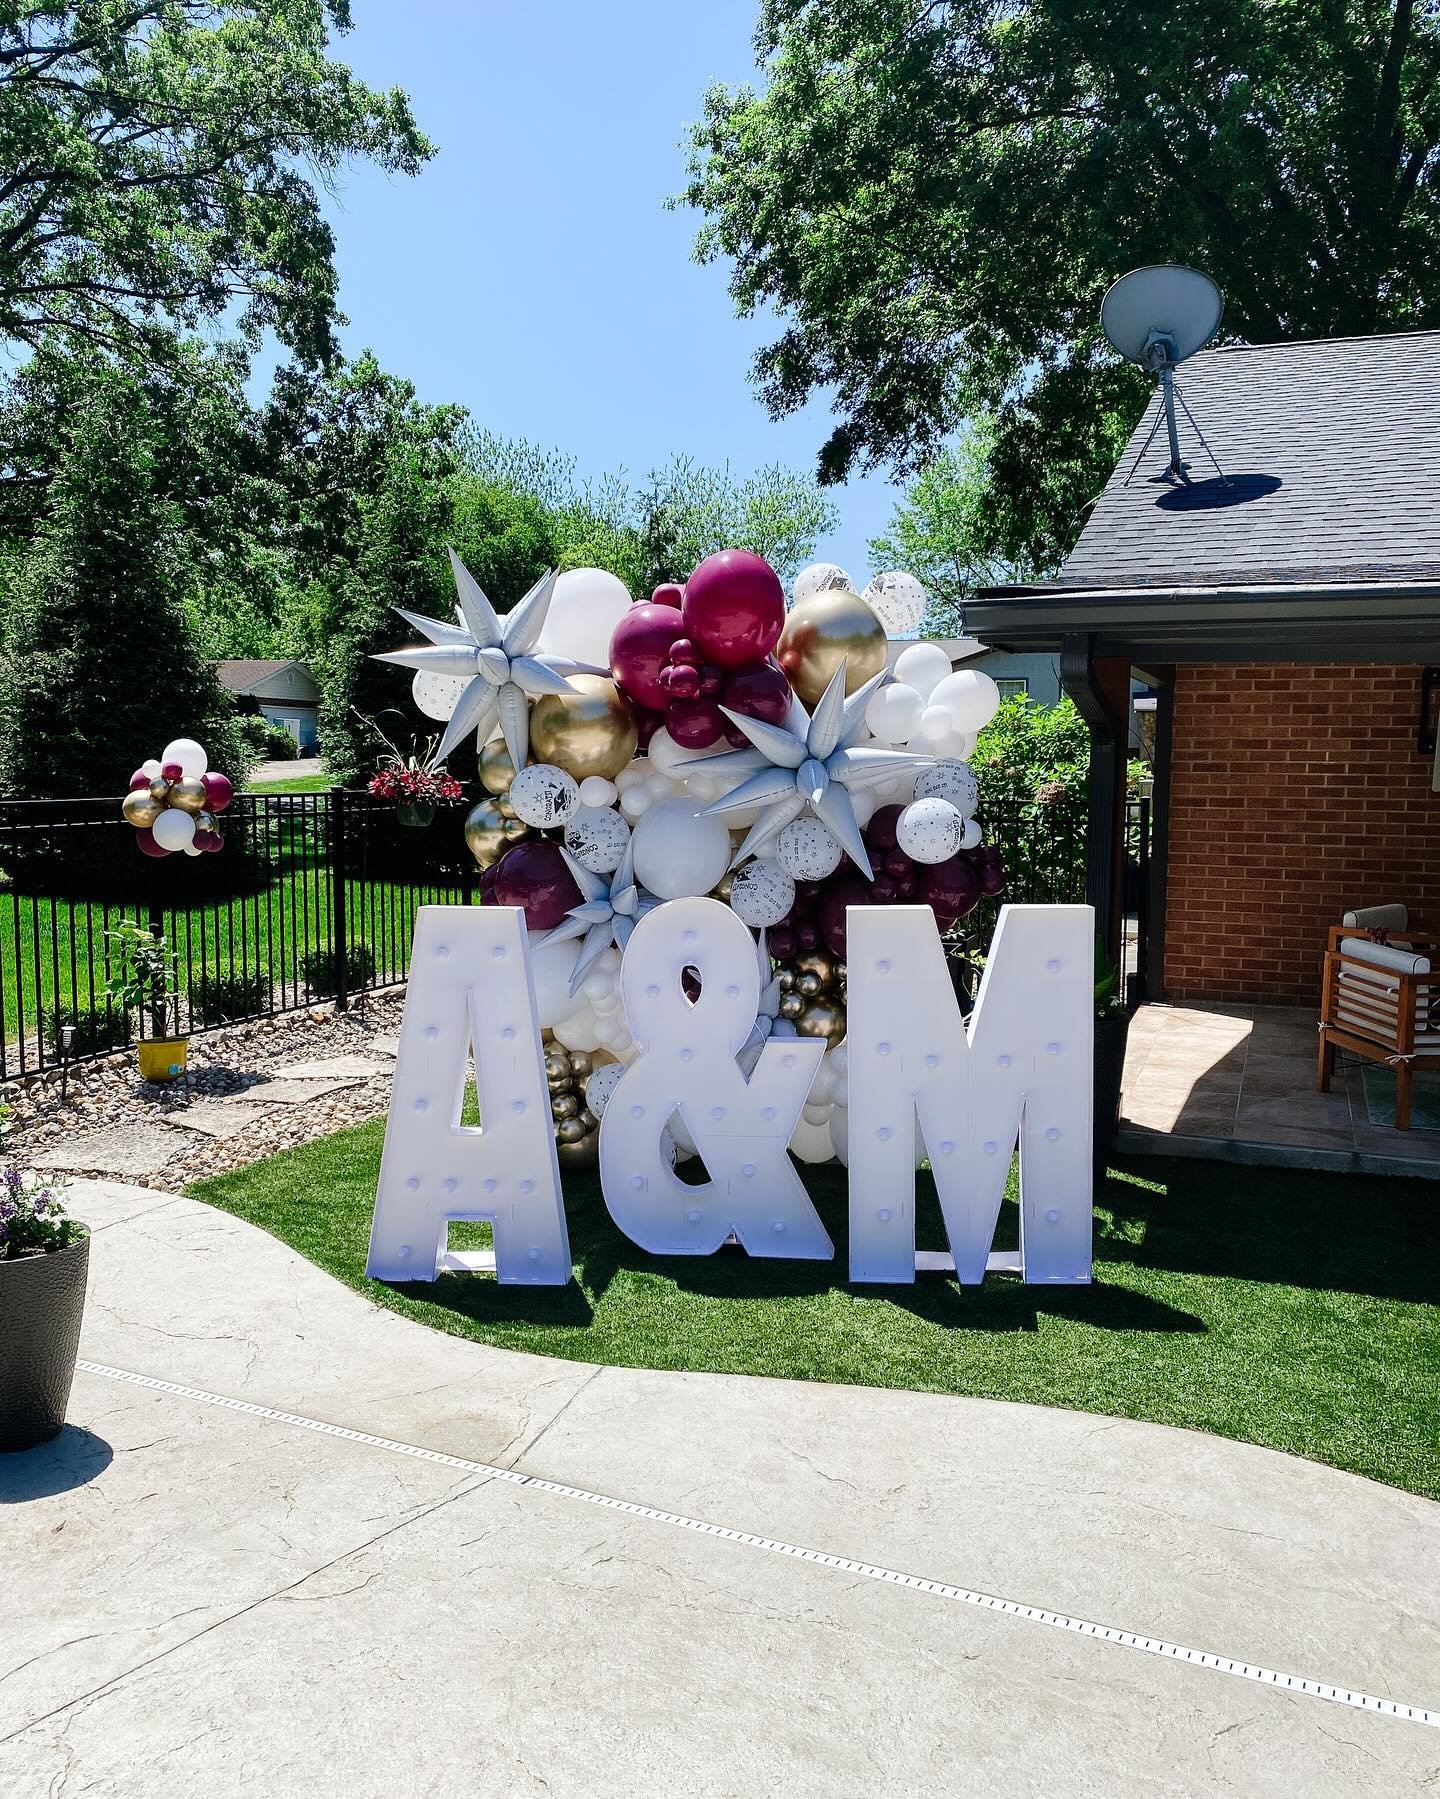 🎓Texas A&amp;M Grad Party🎓
Graduation party season is officially upon us and we can&rsquo;t wait to spend the next couple of months celebrating the graduates! This client could not have asked for better weather to host this outdoor event - it was P